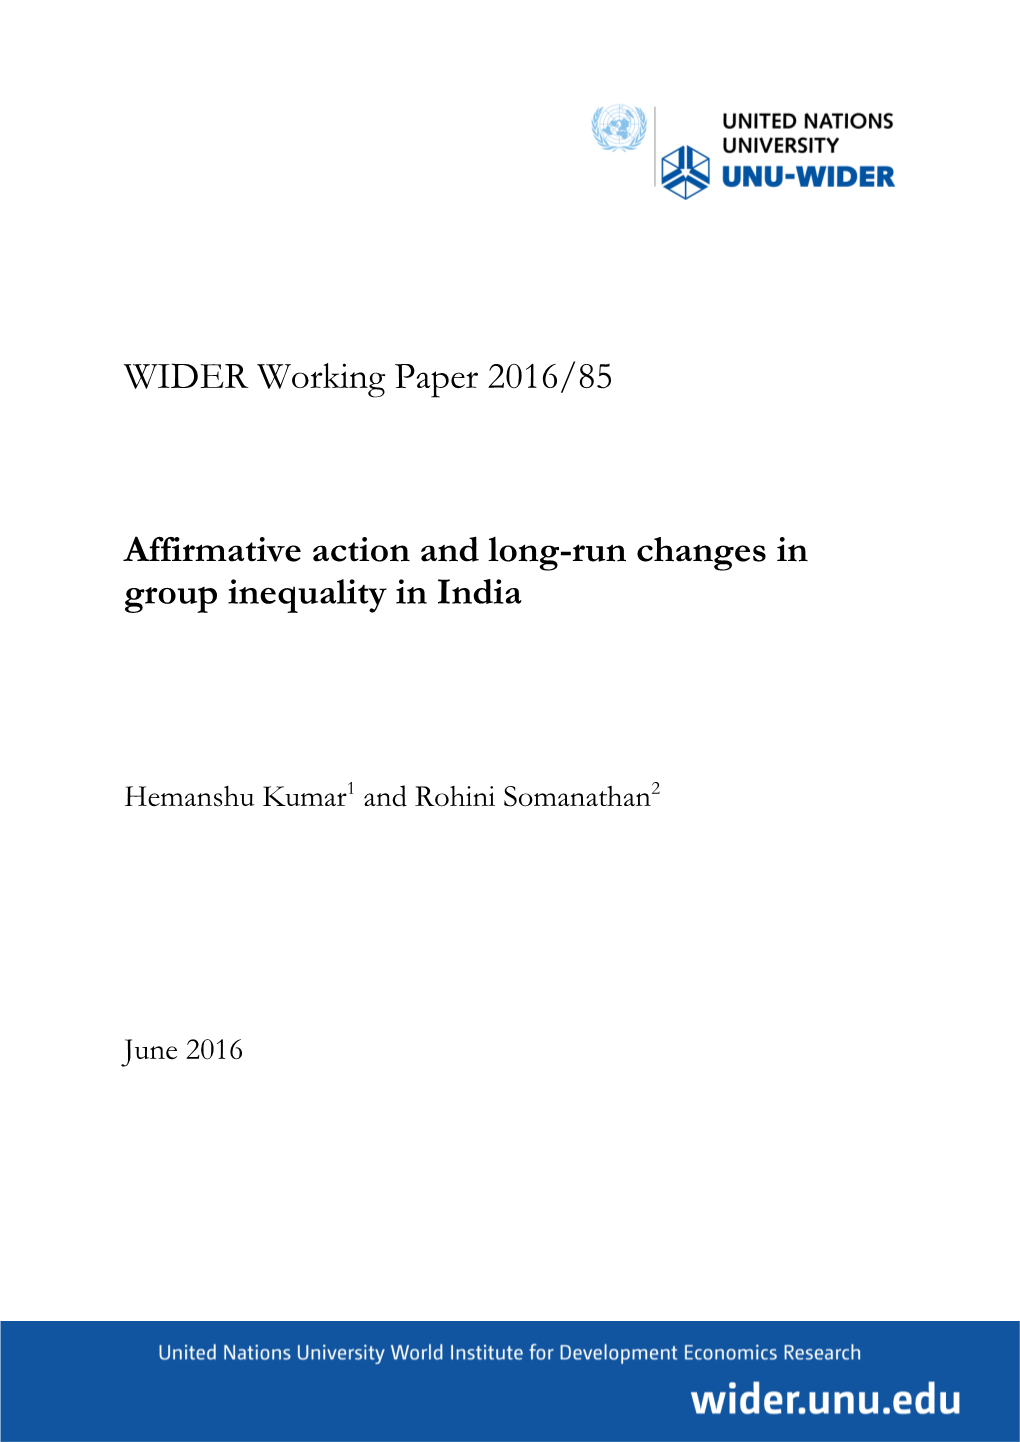 WIDER Working Paper 2016/85 Affirmative Action and Long-Run